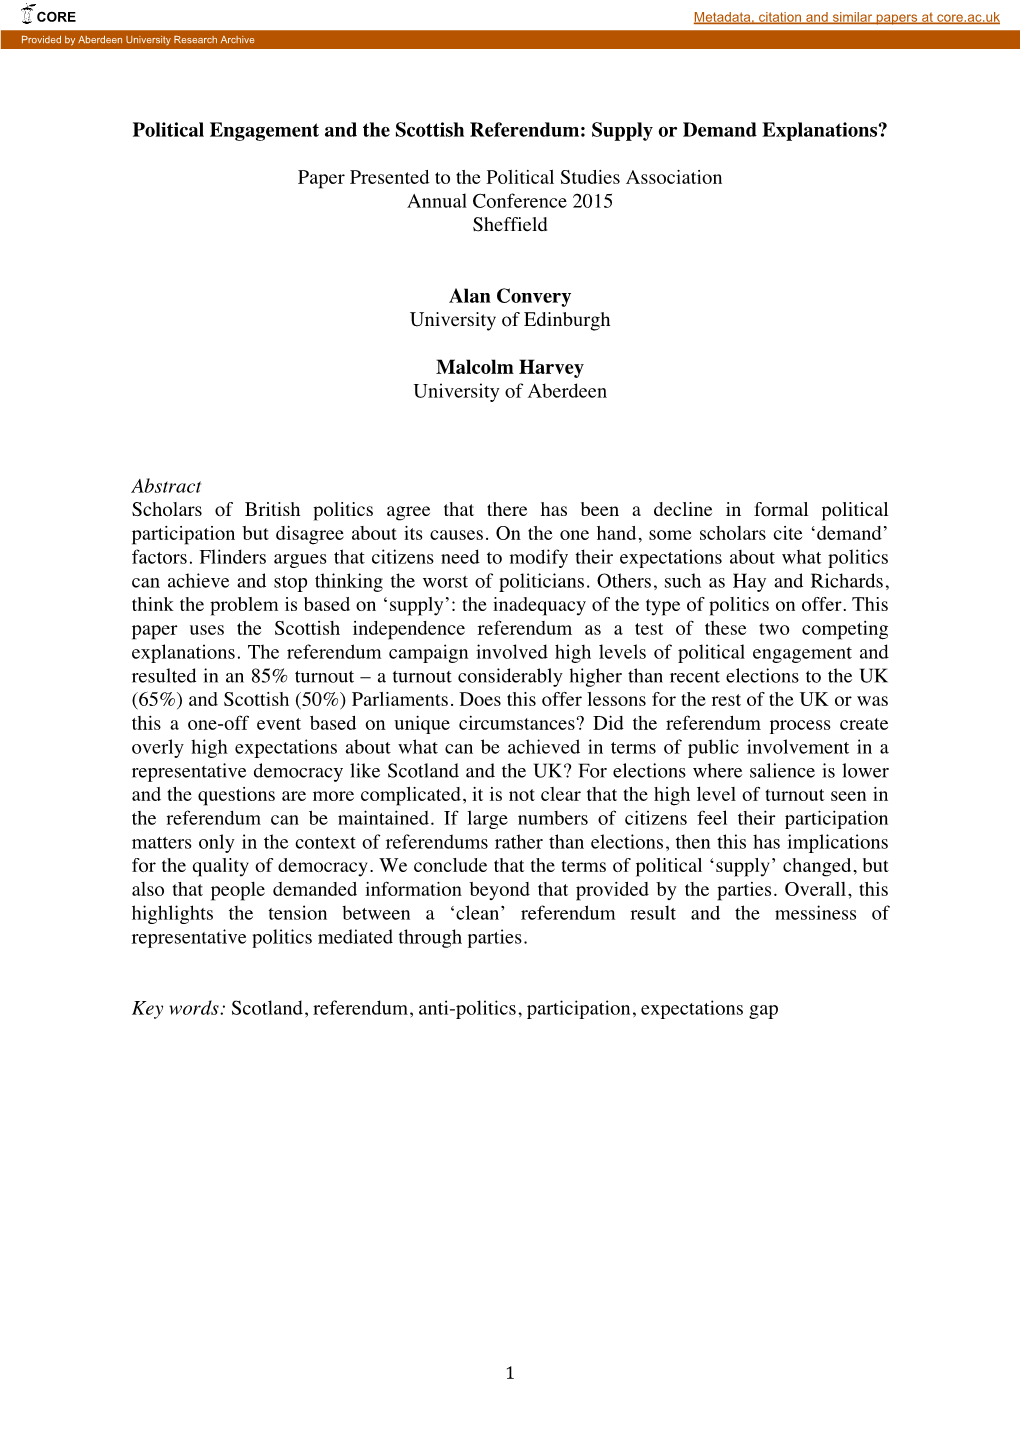 Political Engagement and the Scottish Referendum: Supply Or Demand Explanations?